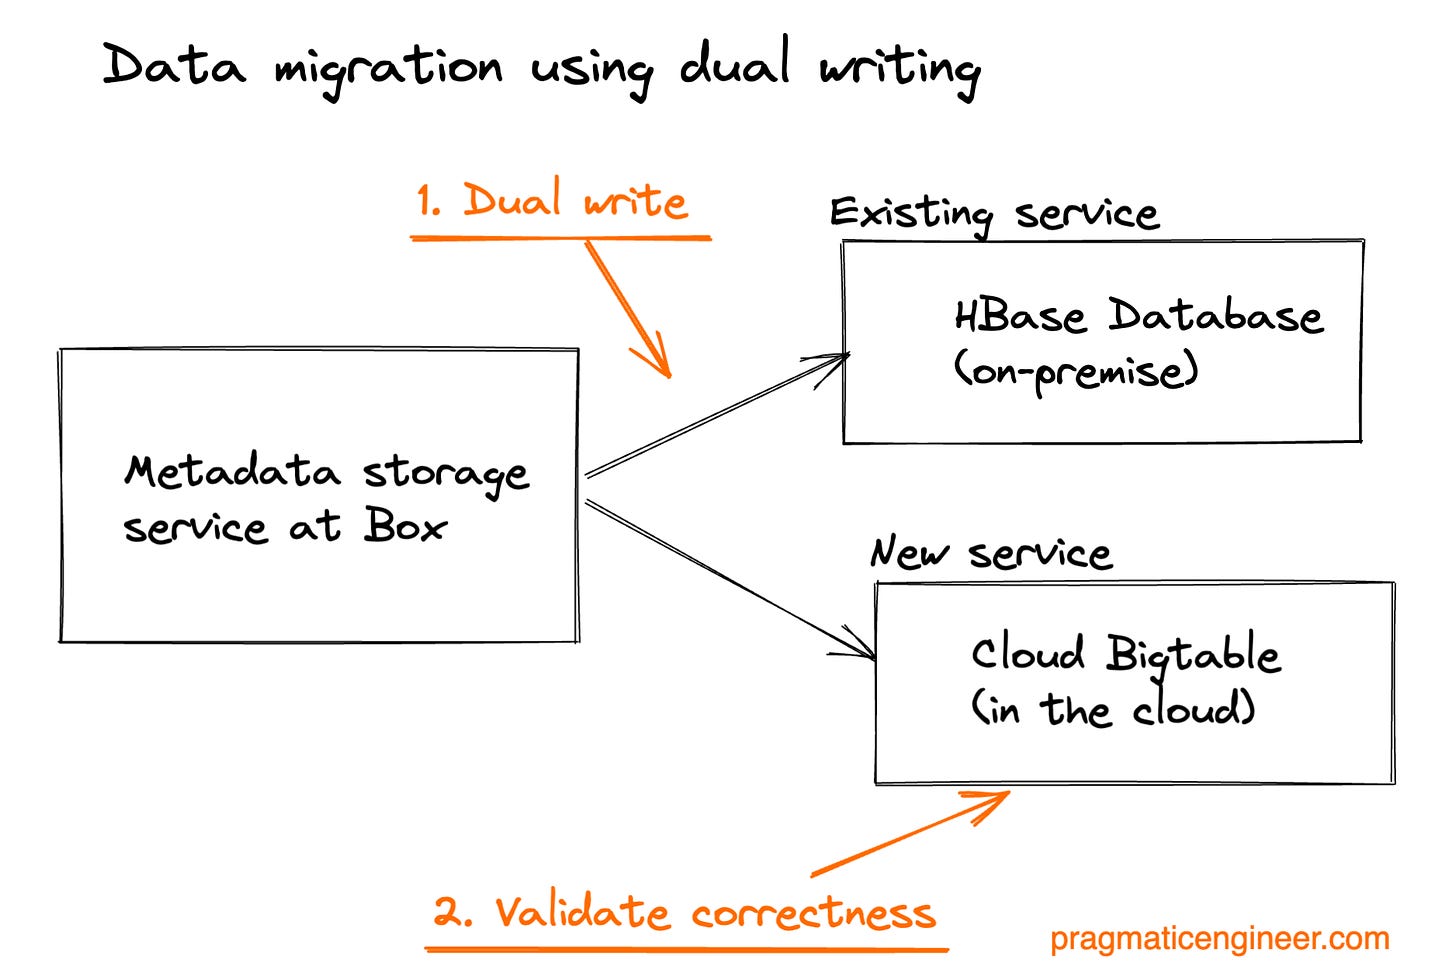 The approach a Box team took to migrate from HBase to Cloud Bigtable: utilizing dual writing, then validating results.